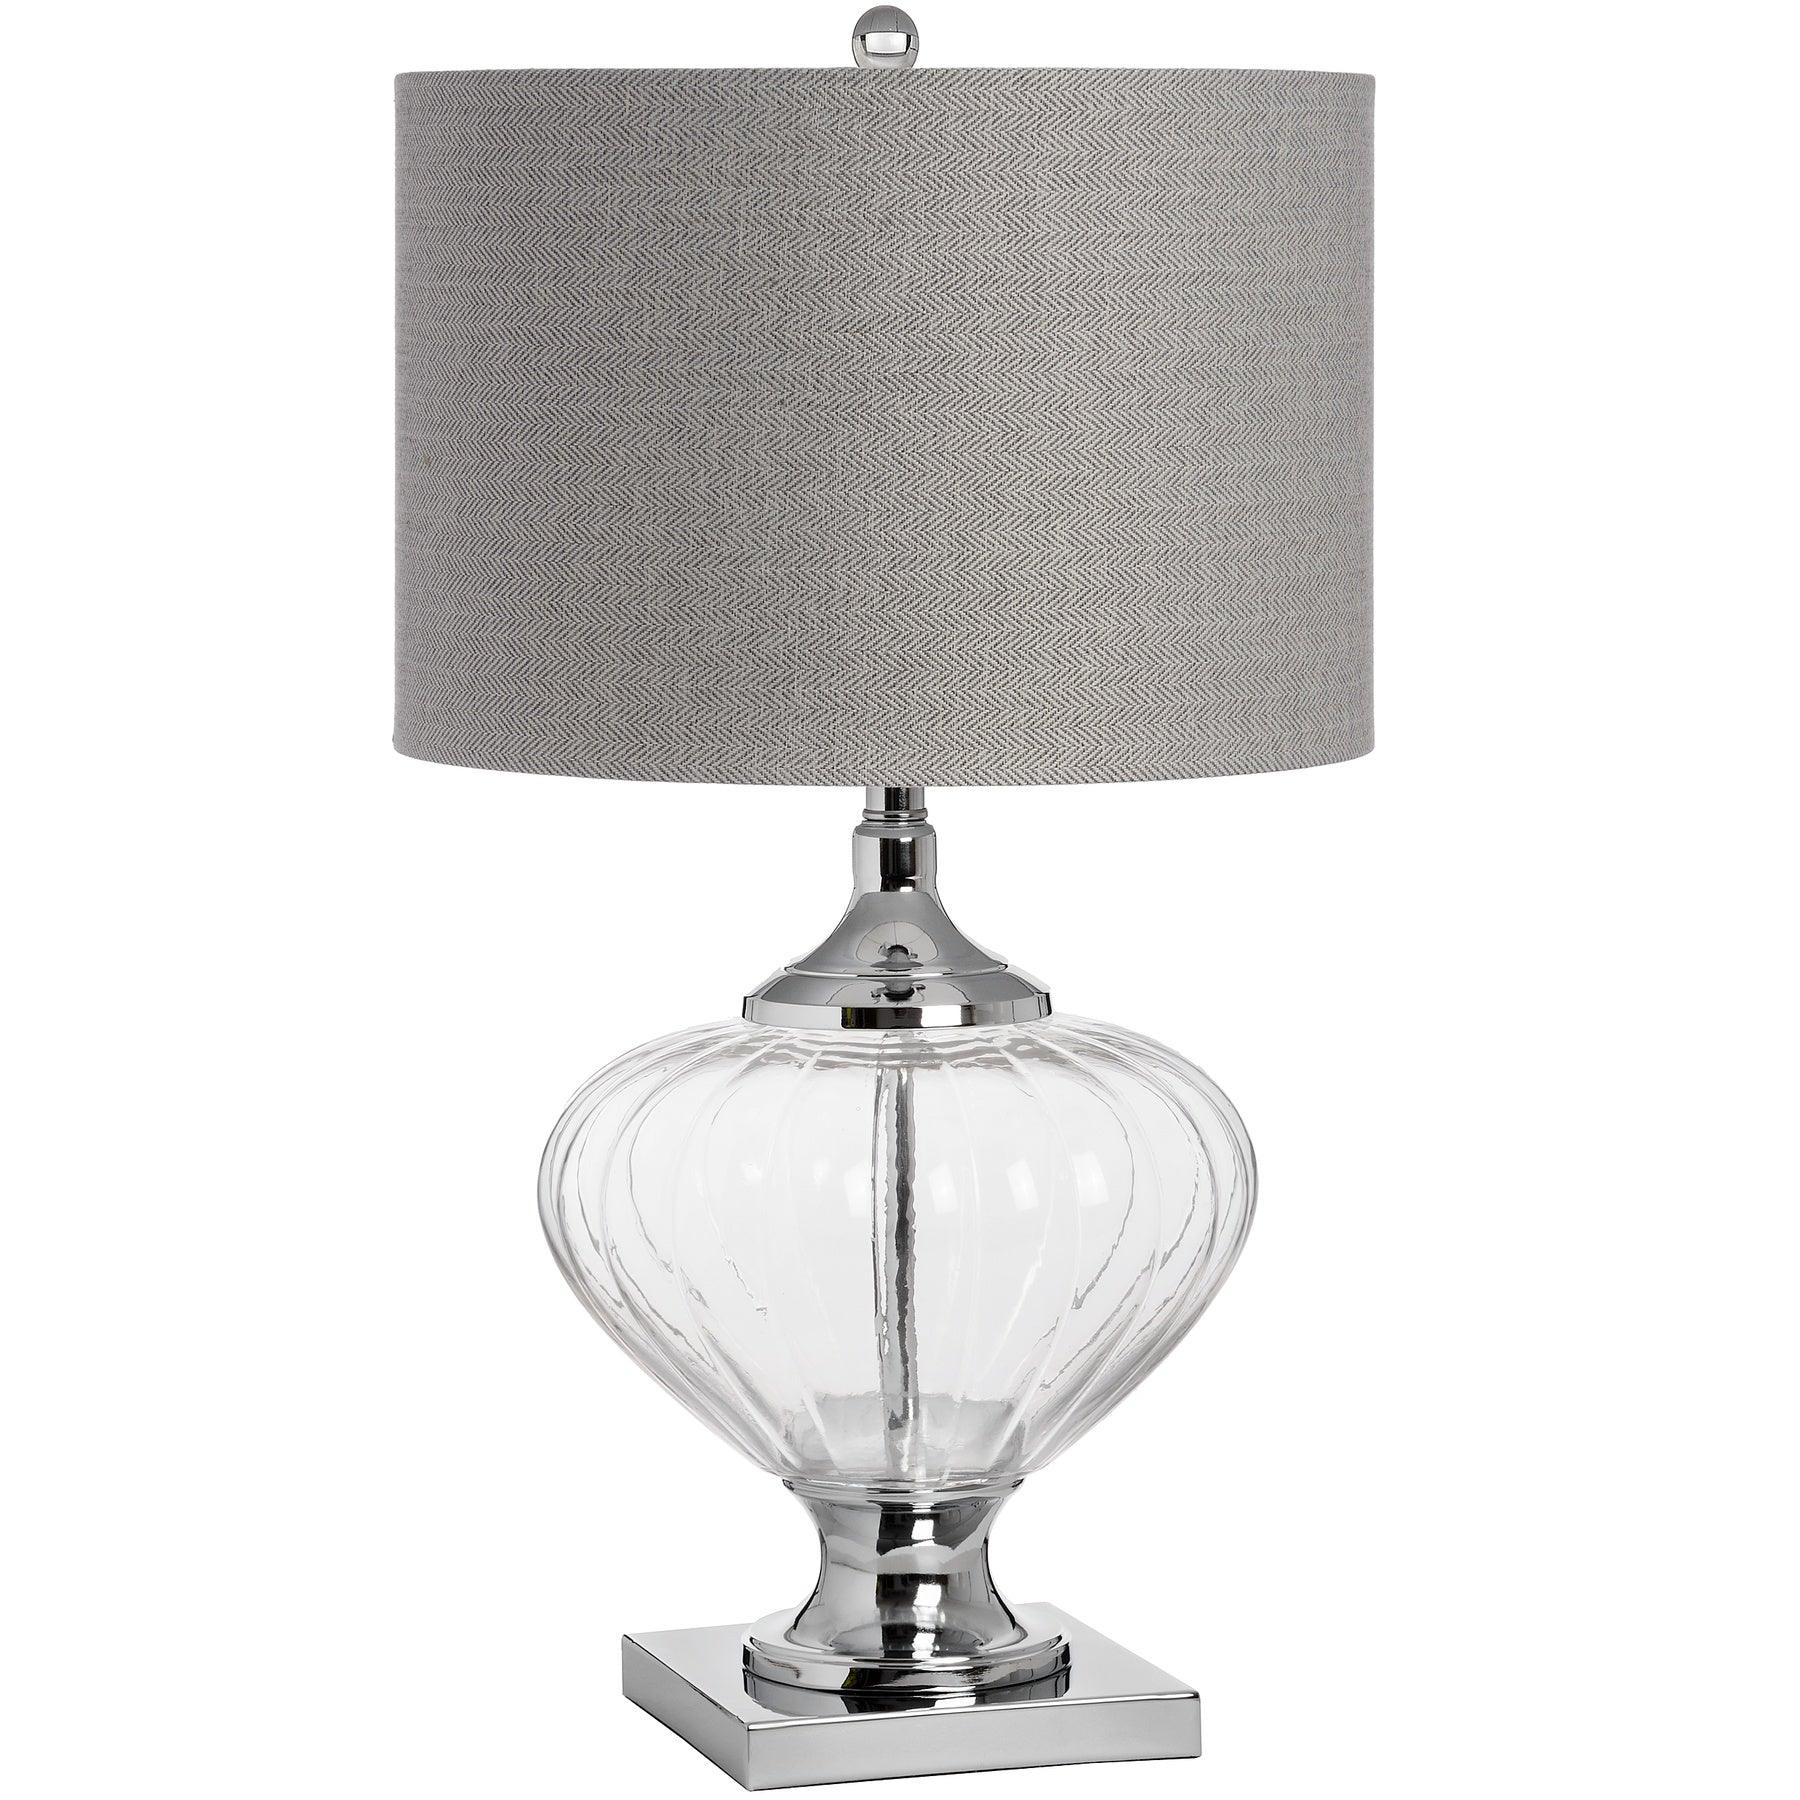 View Verona Glass Table Lamp information